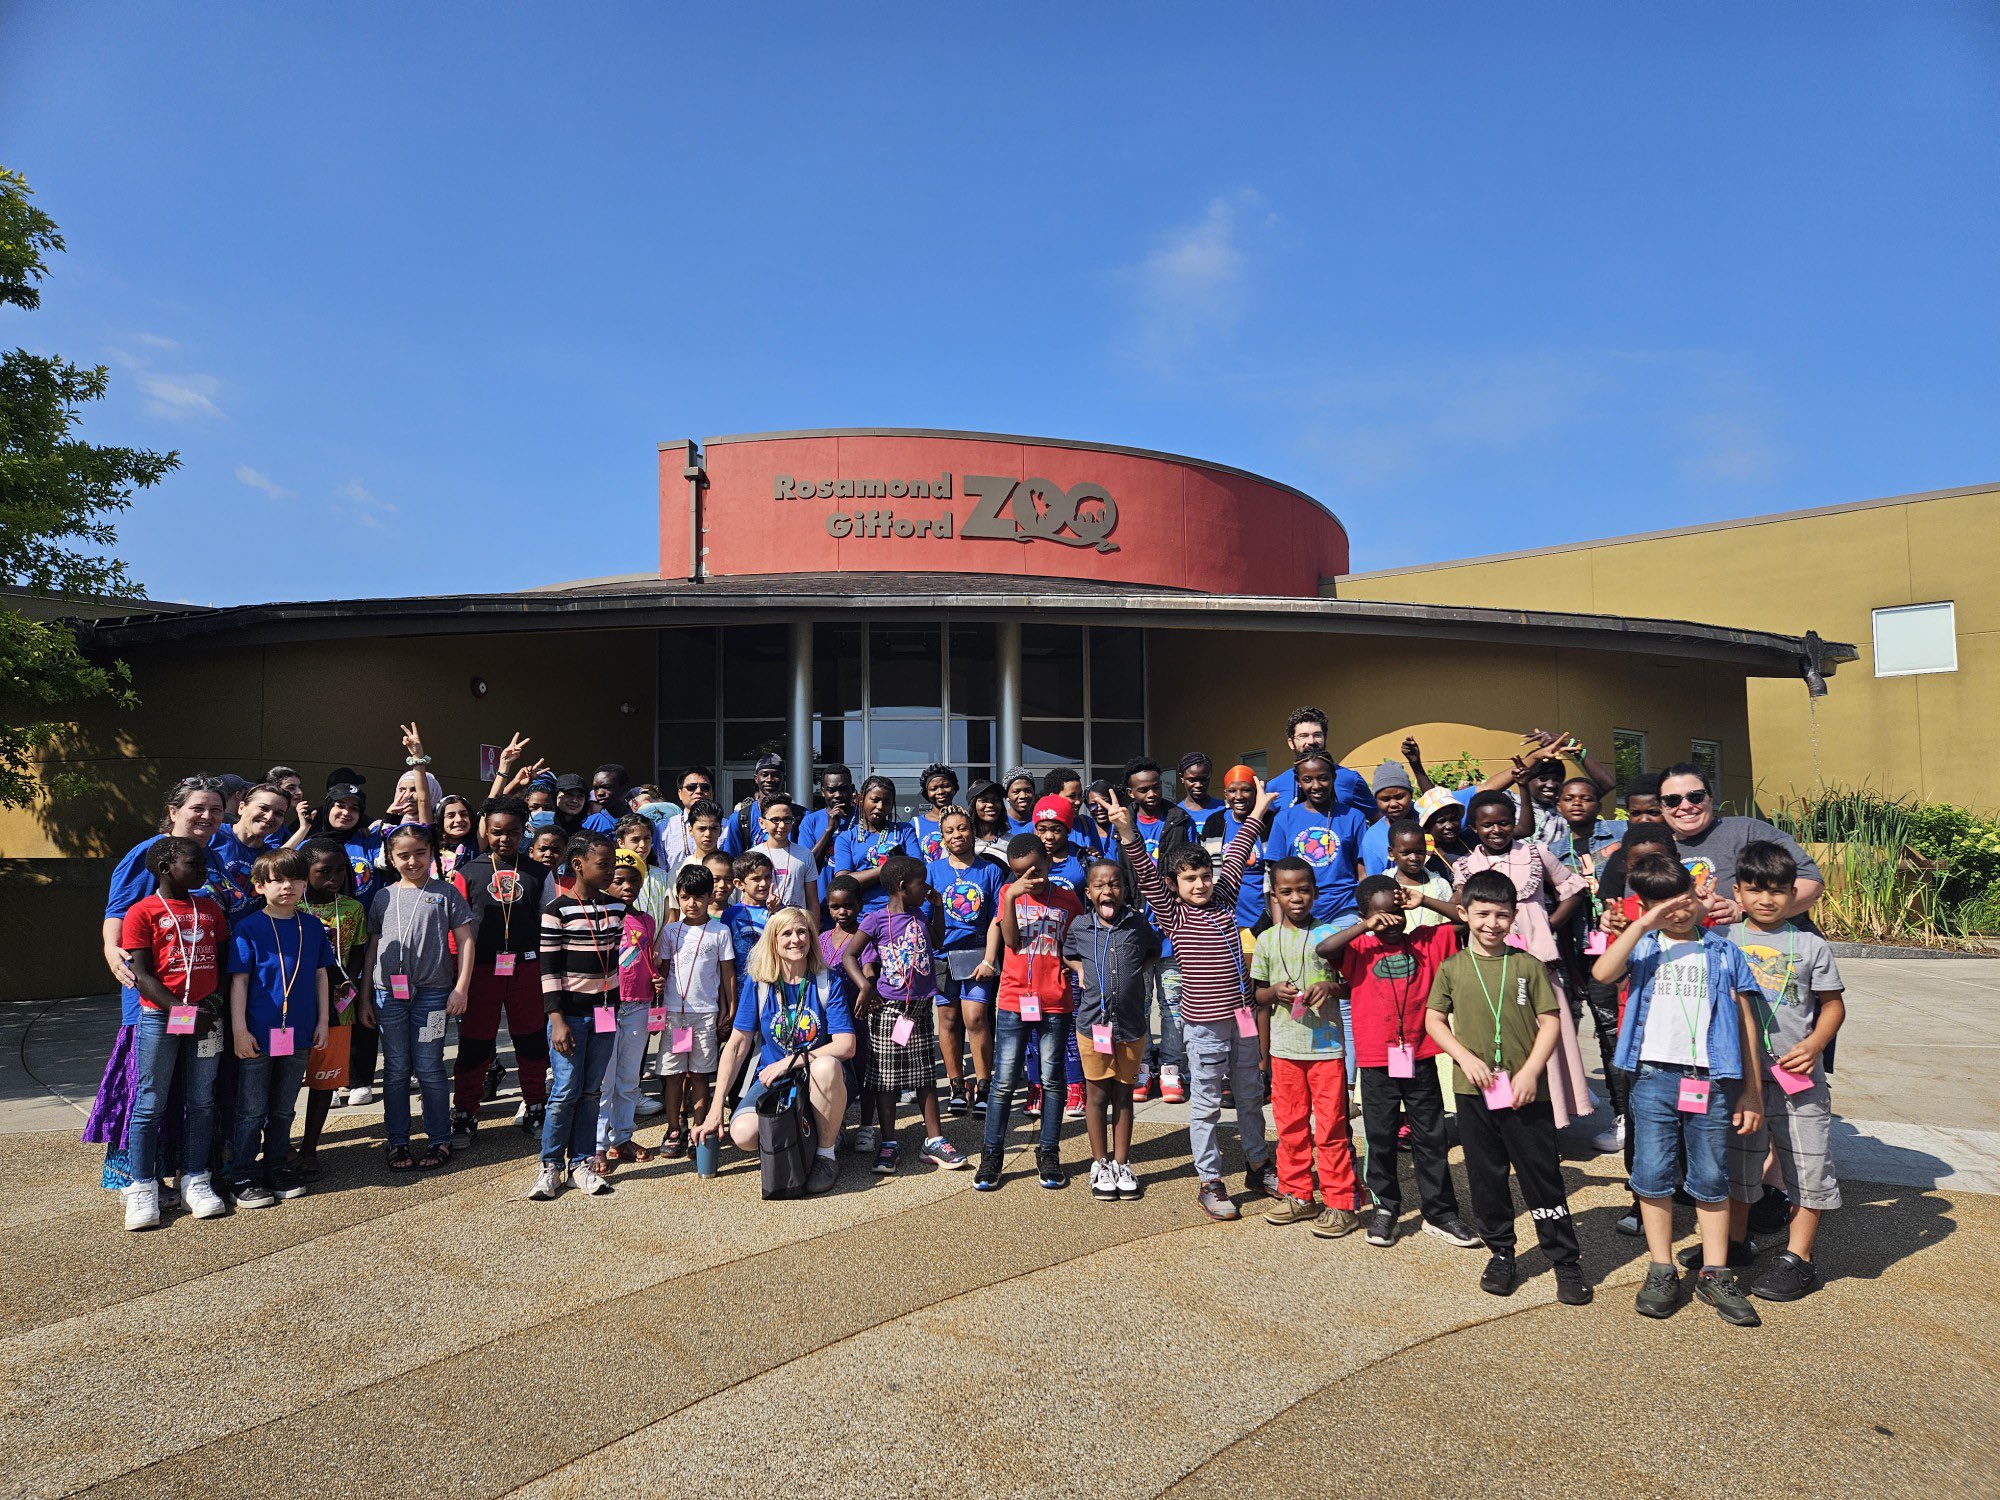 This is a photo of students from the Institute for Language & Culture standing in front of the entrance to the Rosamond Gifford Zoo and smiling at the camera.